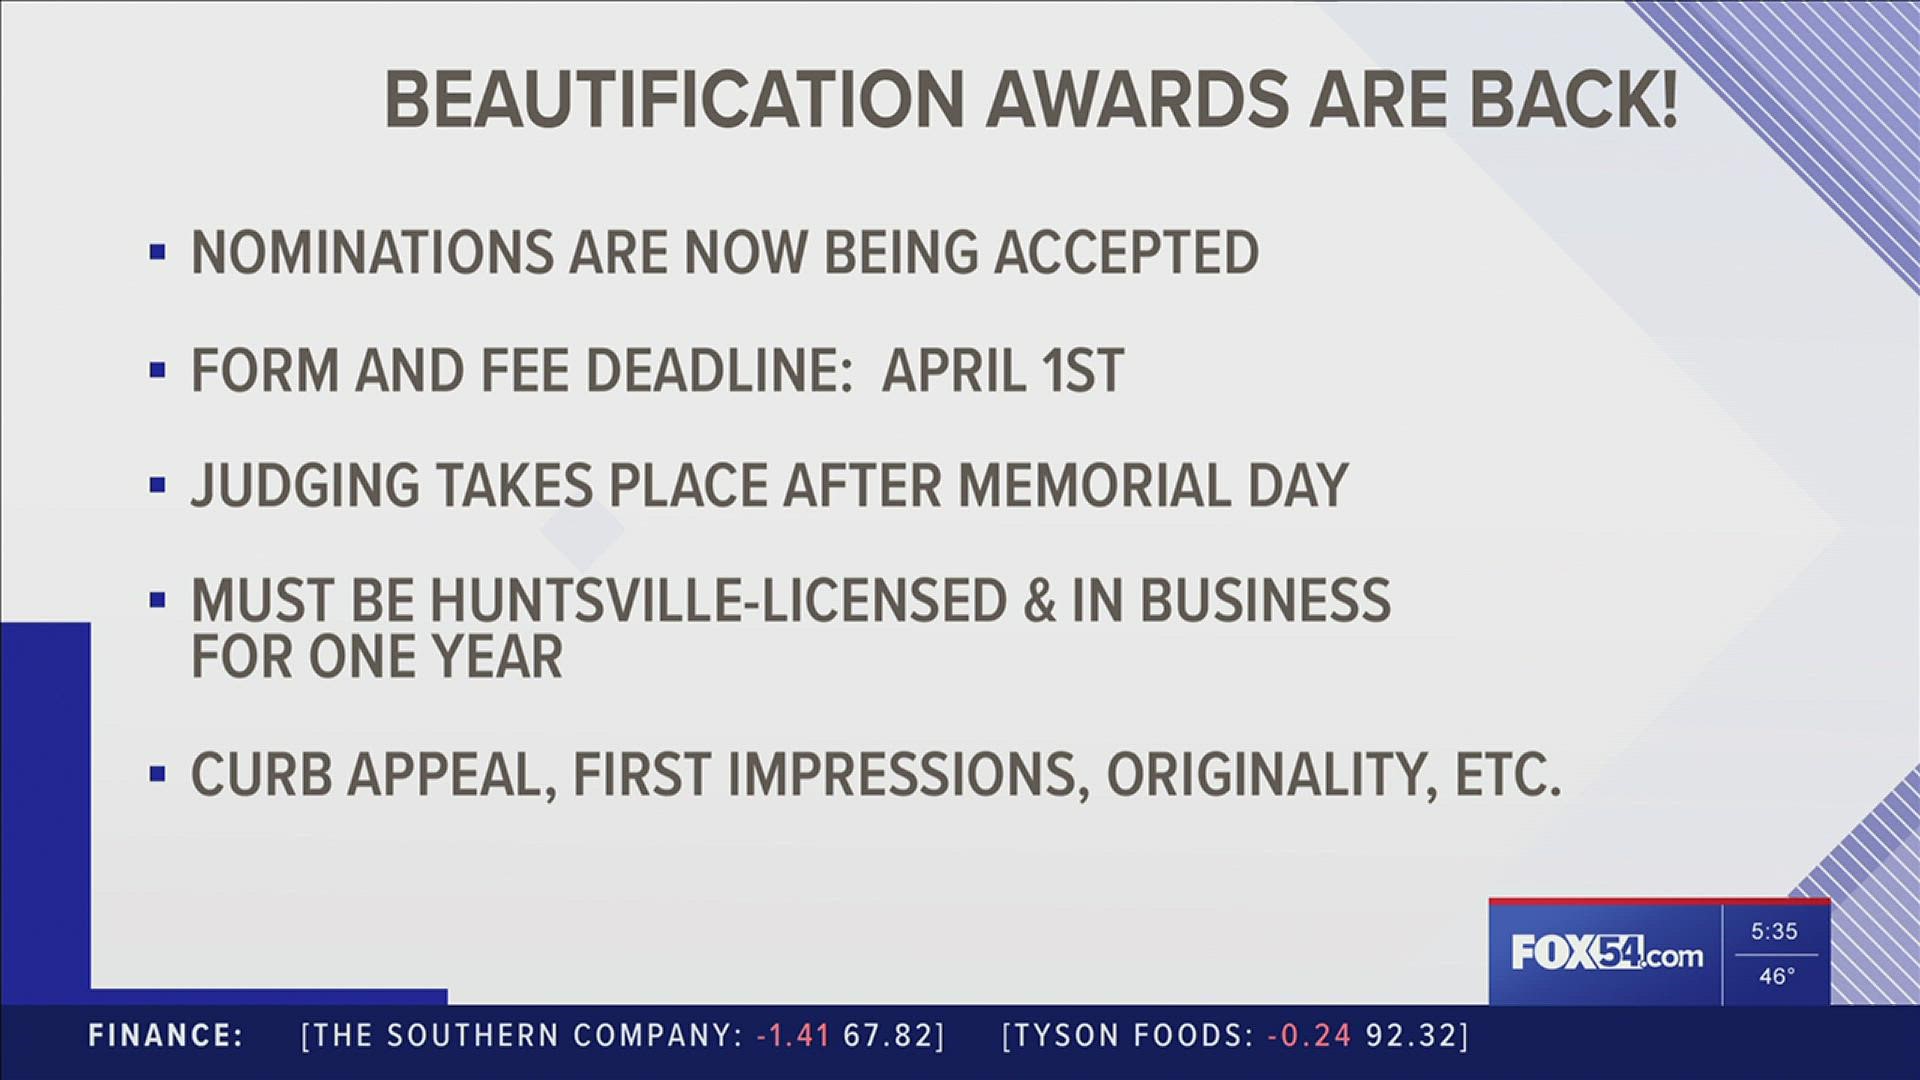 After a two-year absence due to COVID, the Huntsville Beautification Awards are back.